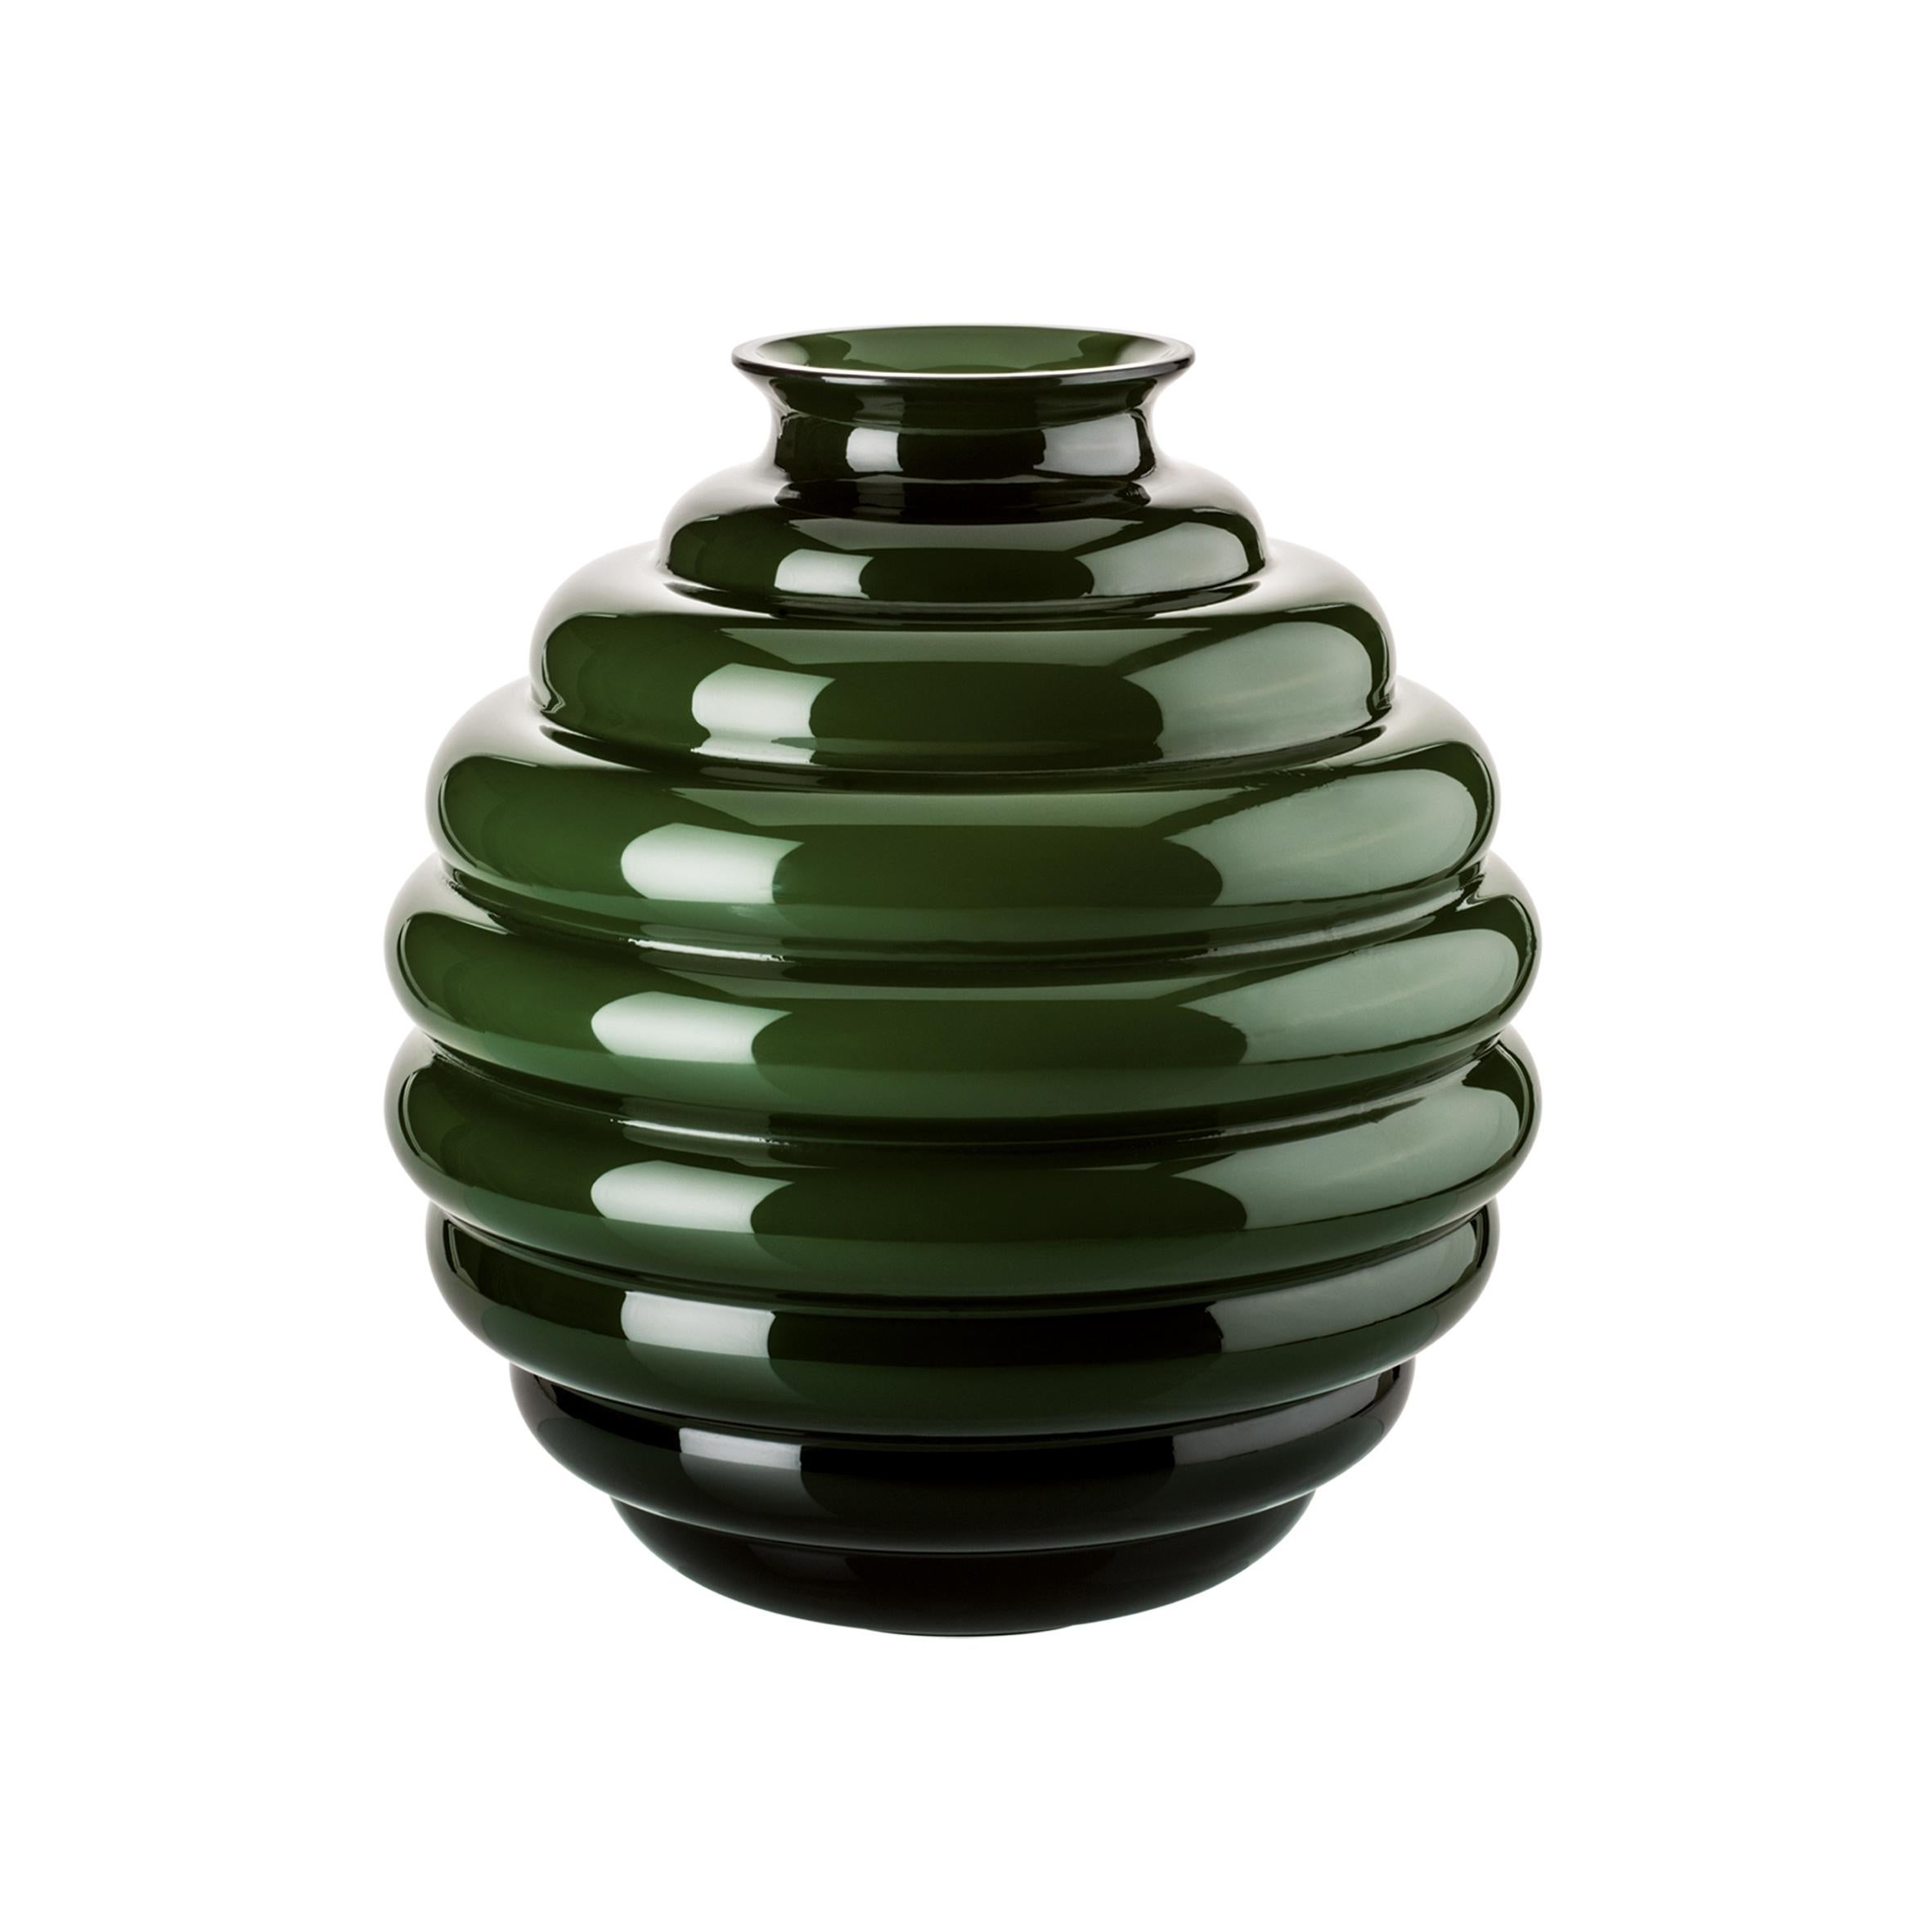 Venini glass vase in apple green designed by Napoleone Martinuzzi in 1930. Perfect for indoor home decor as container or statement piece for any room. Also available in other colors on 1stdibs.

Dimensions: 26 cm diameter x 29 cm height.